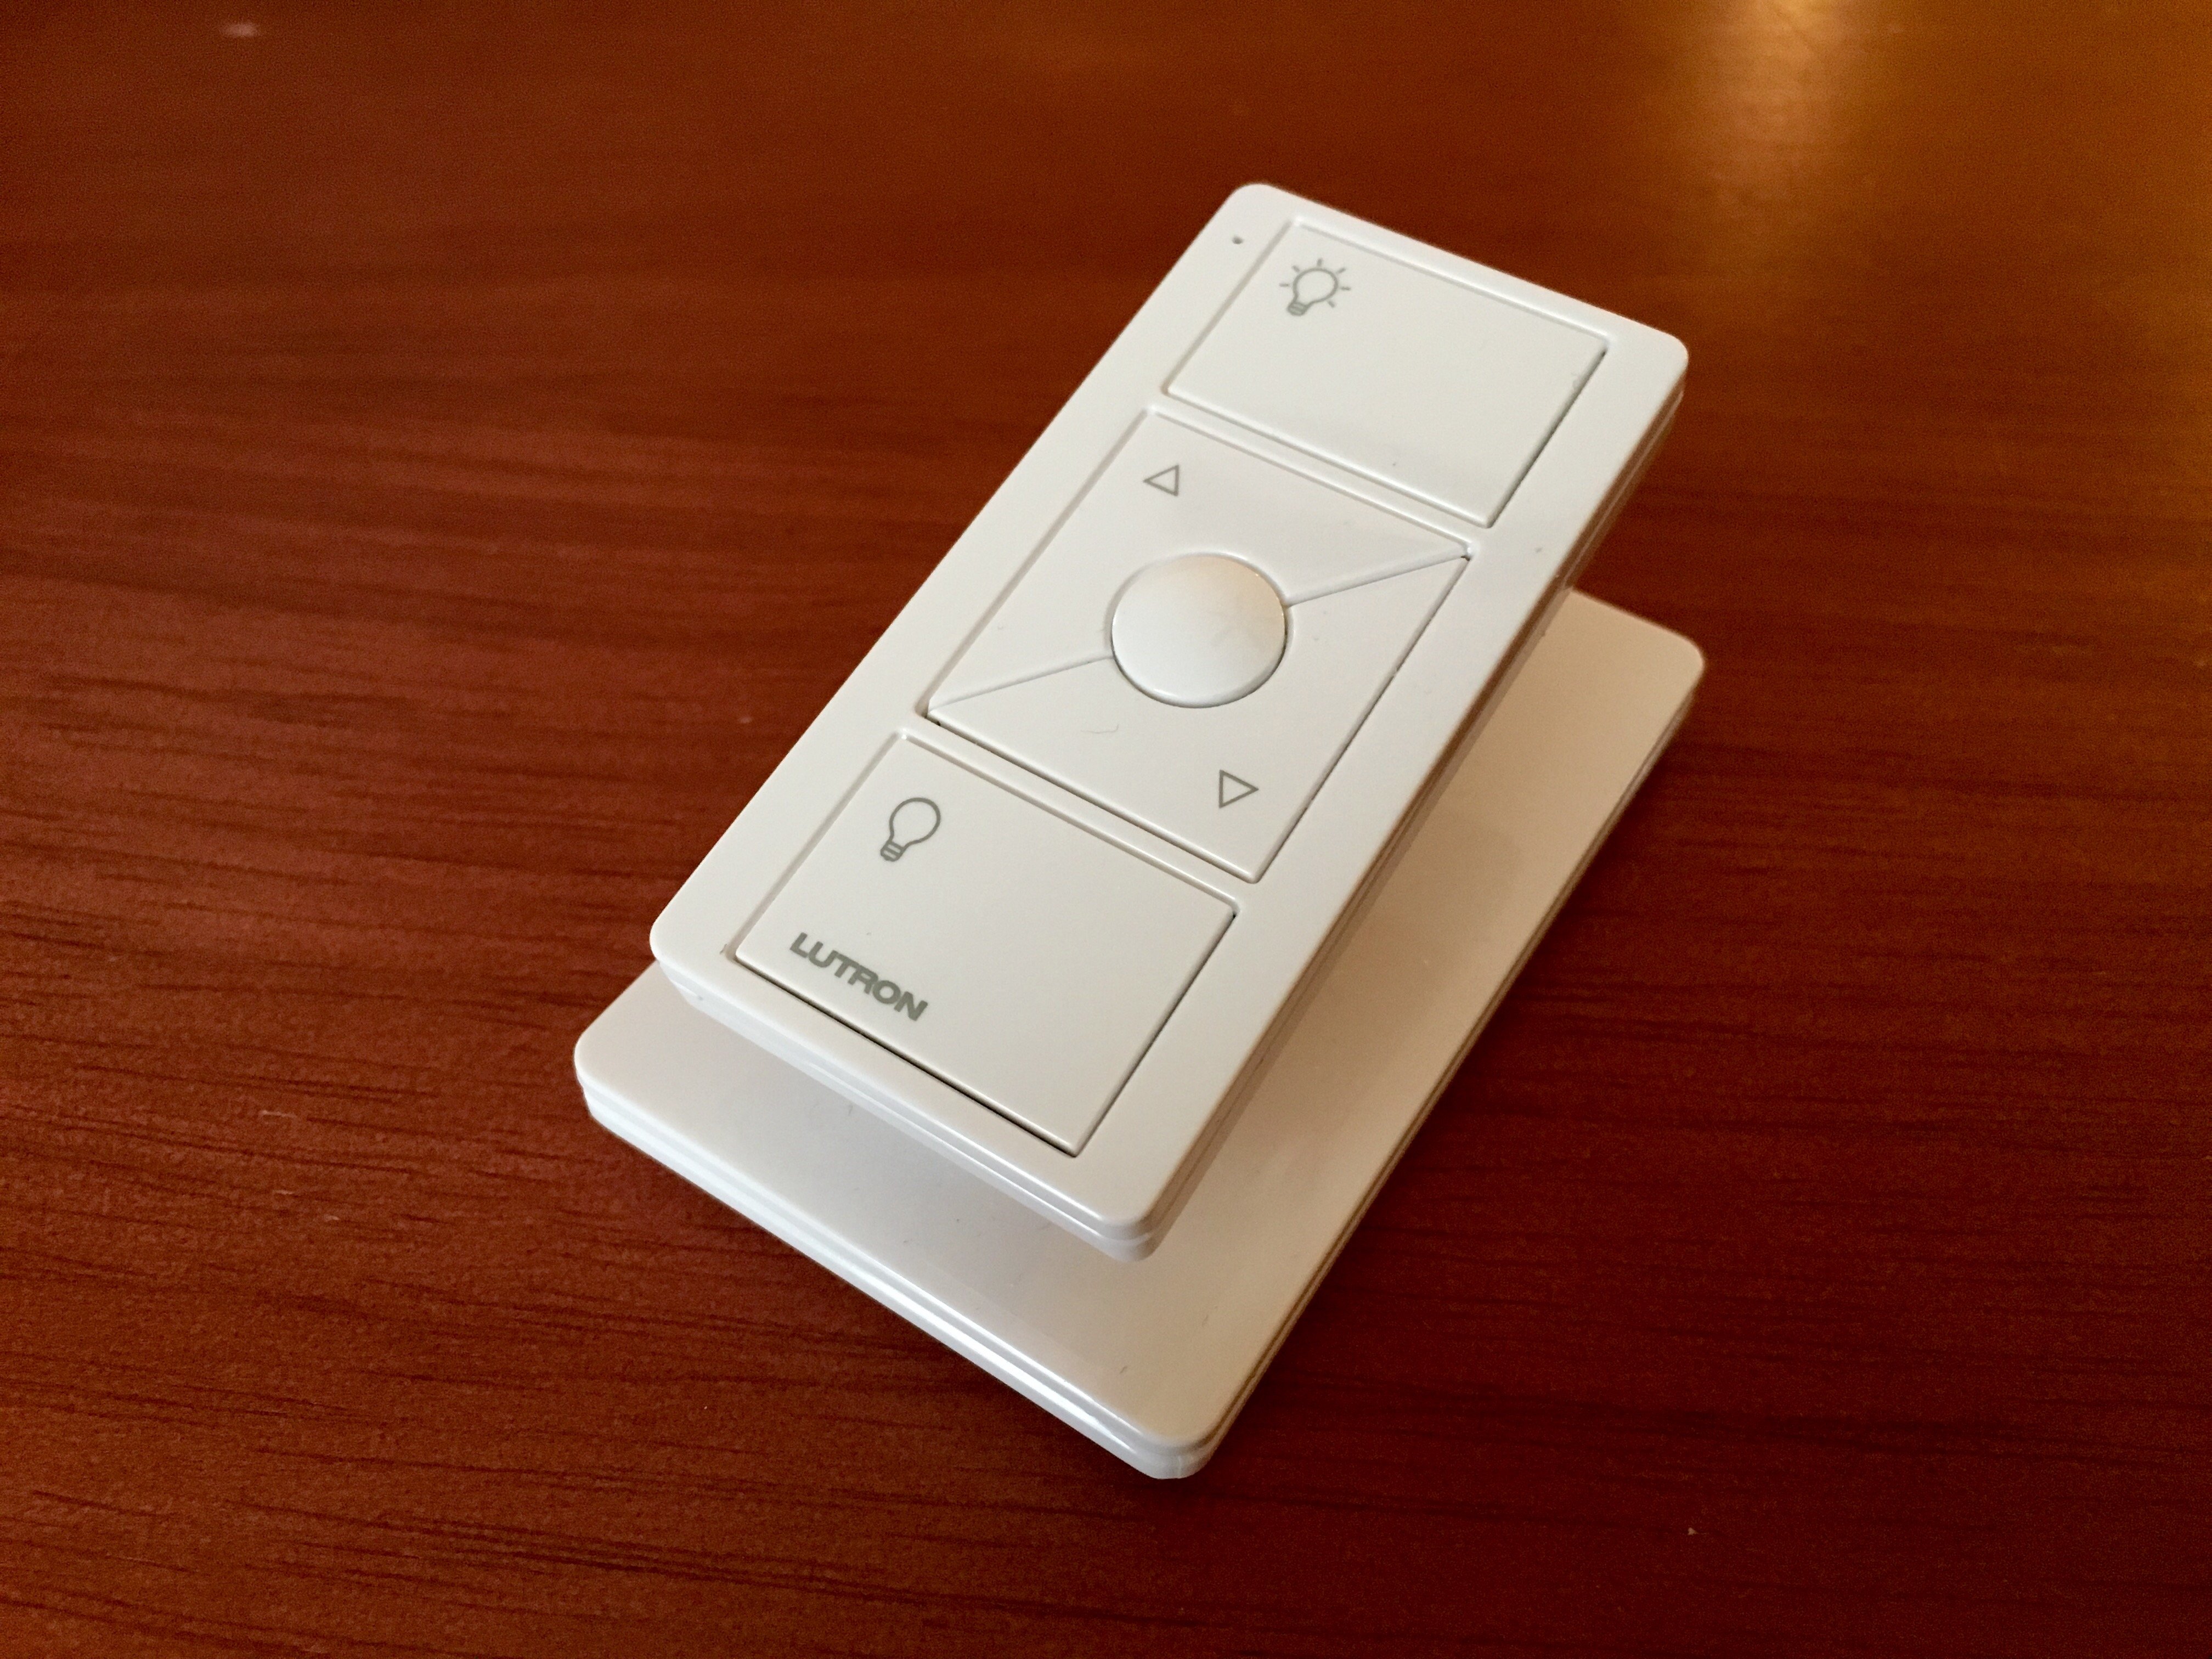 You can wirelessly control your lights with the small Pico remotes, like this one that is on a pedestal.